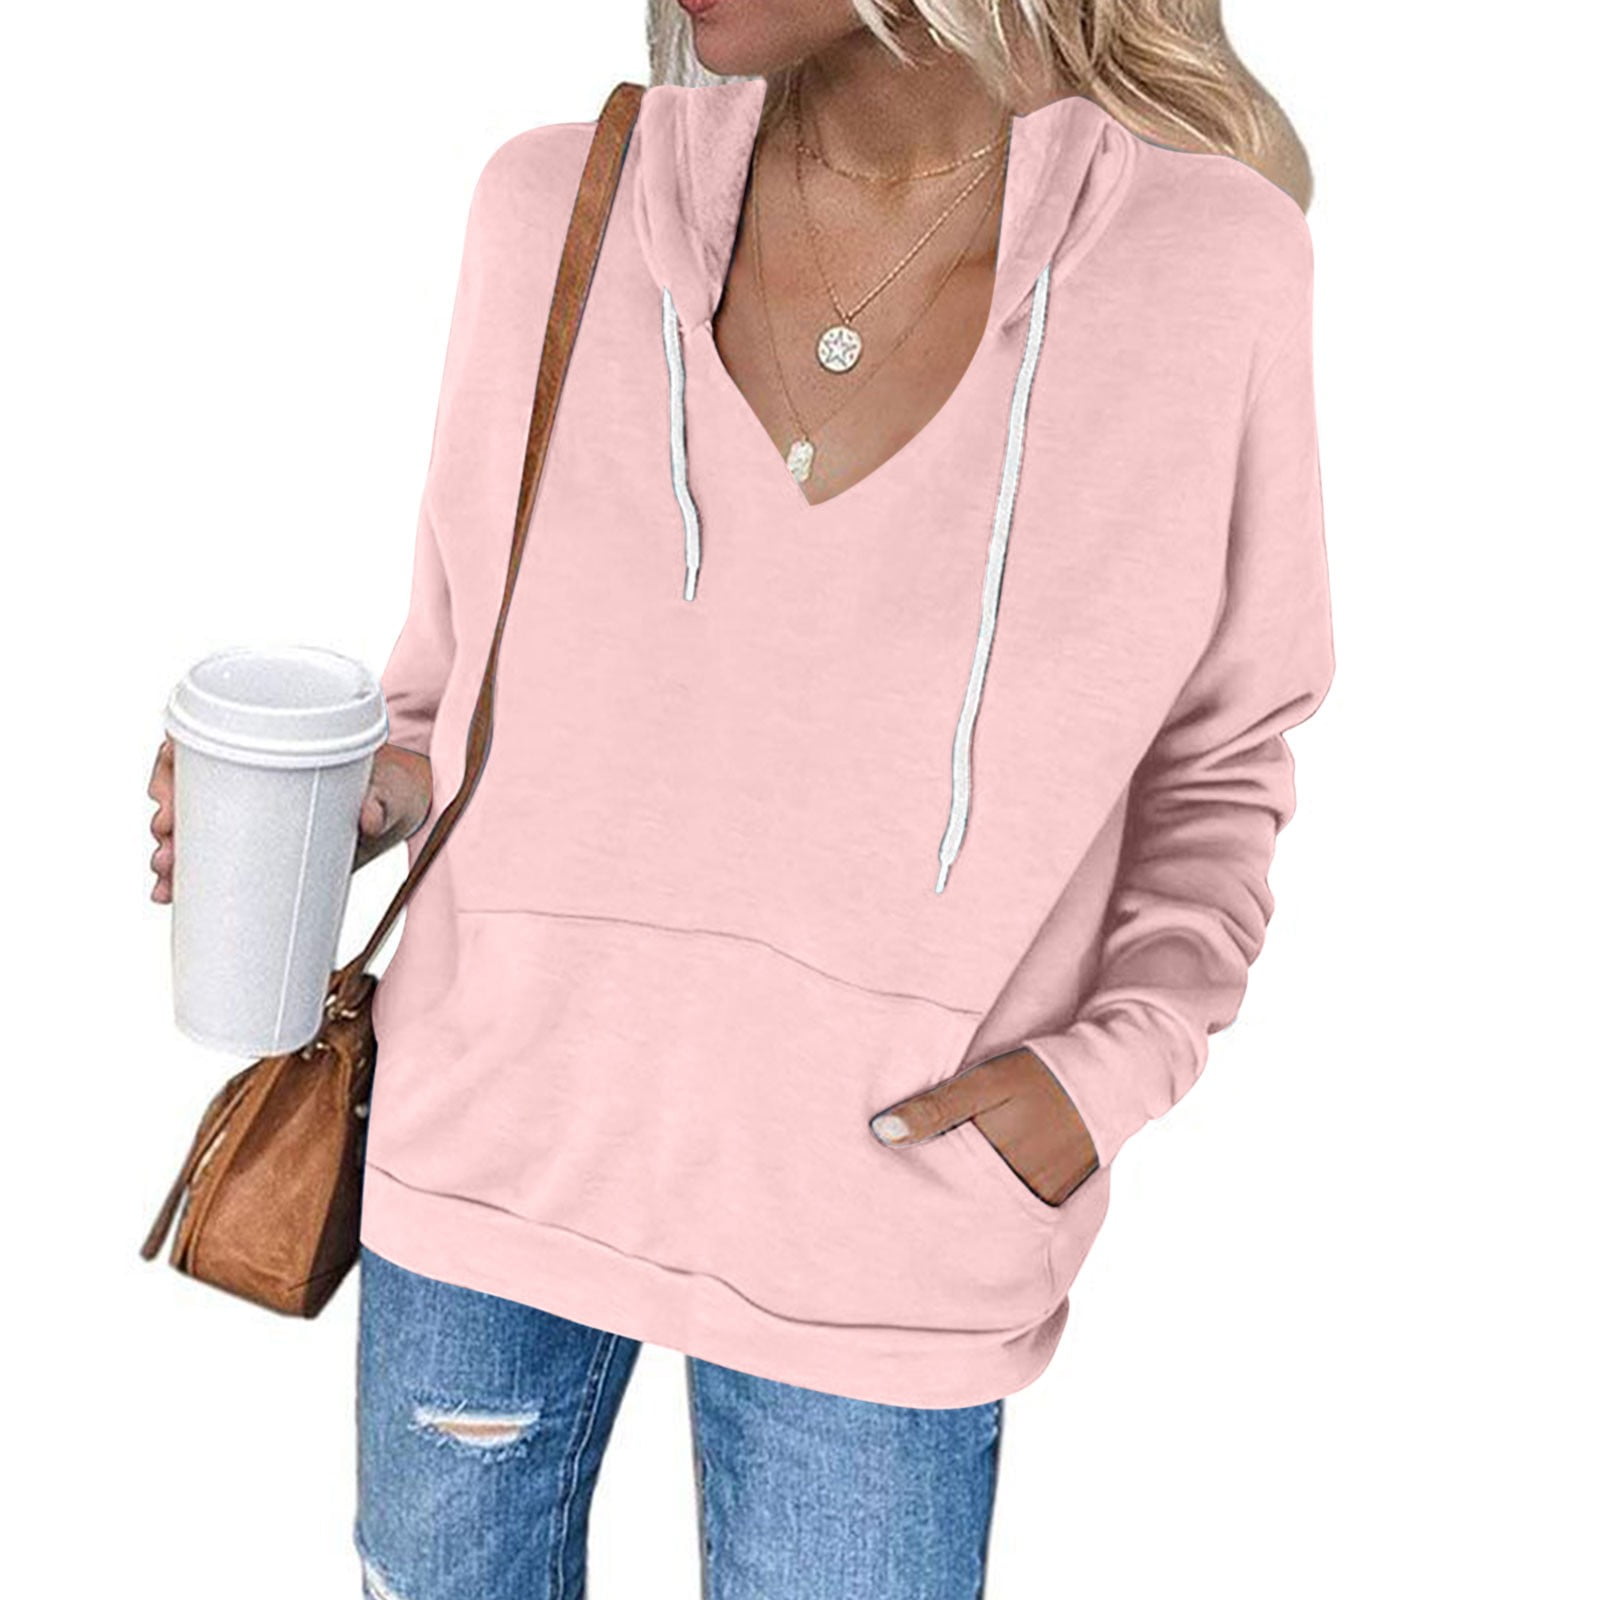 Brilliant Sweater for Women Clearance Women's Casual Color Hooded ...